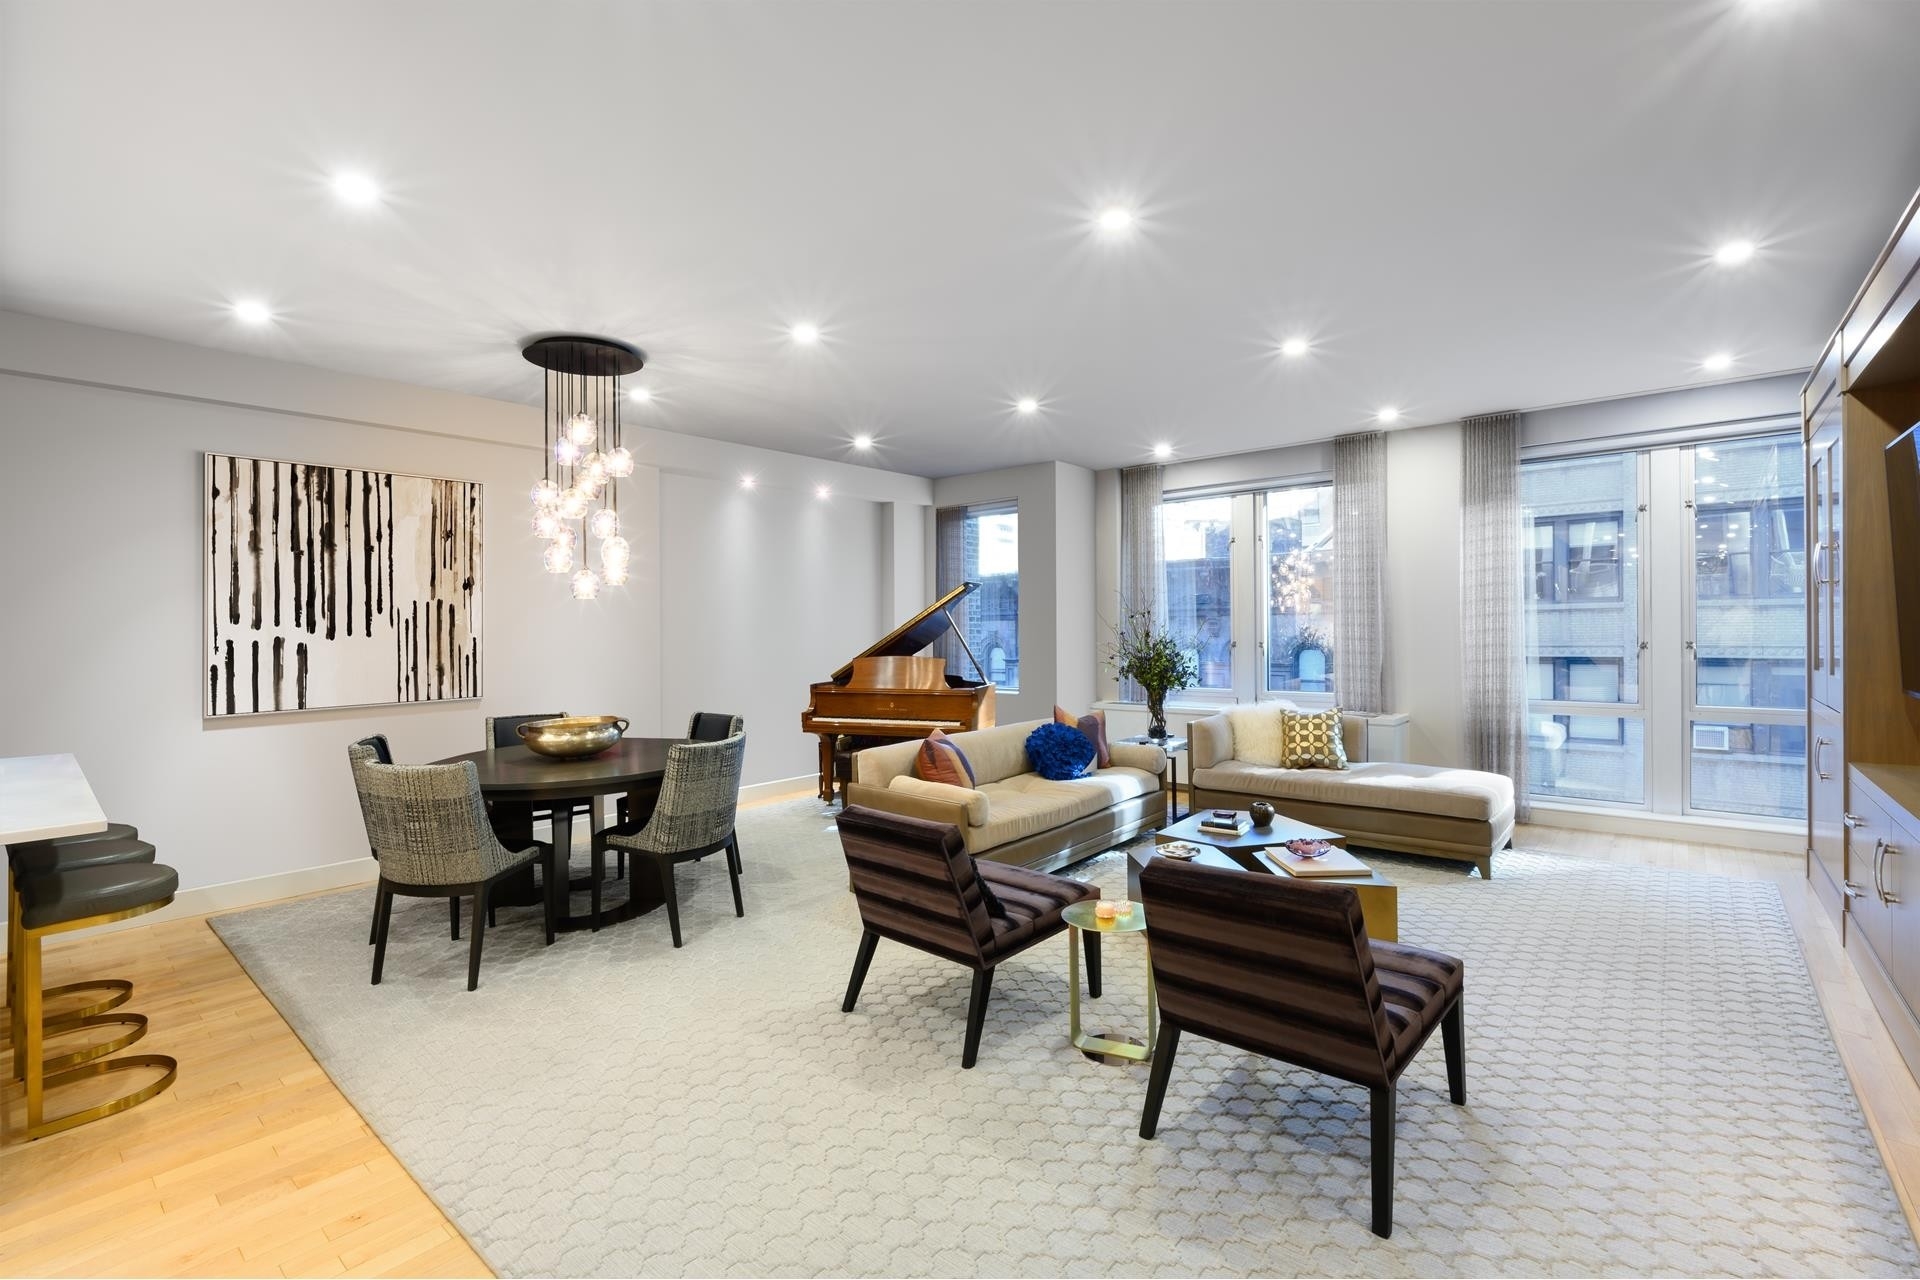 Property at THE PARADIGM CONDO, 146 W 22ND ST, 6 Chelsea, New York, New York 10011